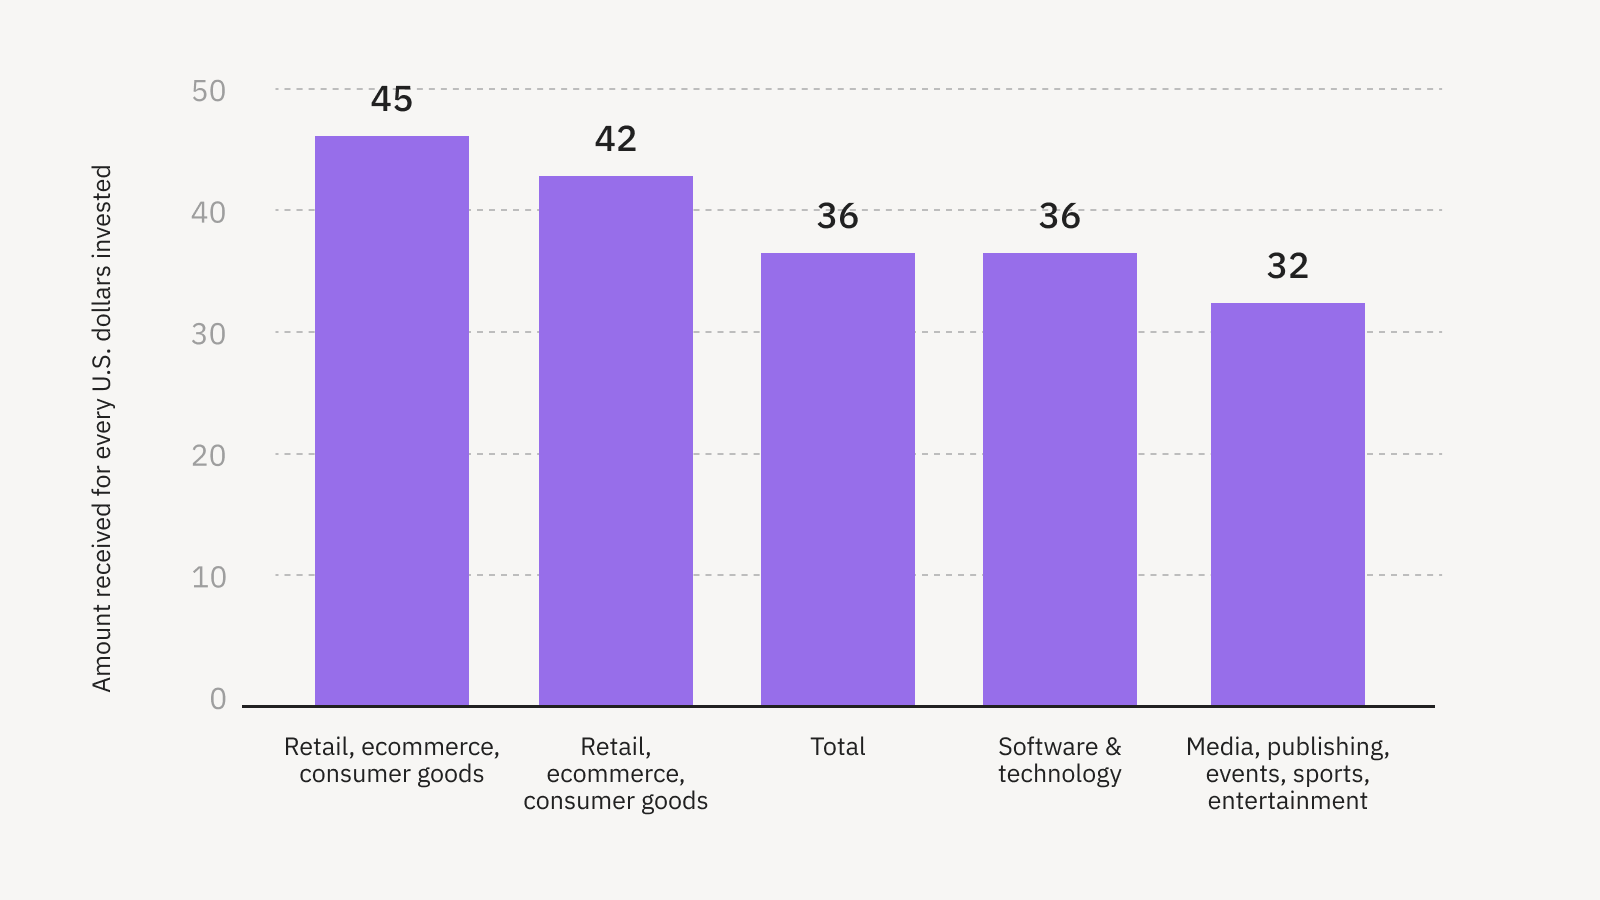 Email ROIs are high across industries